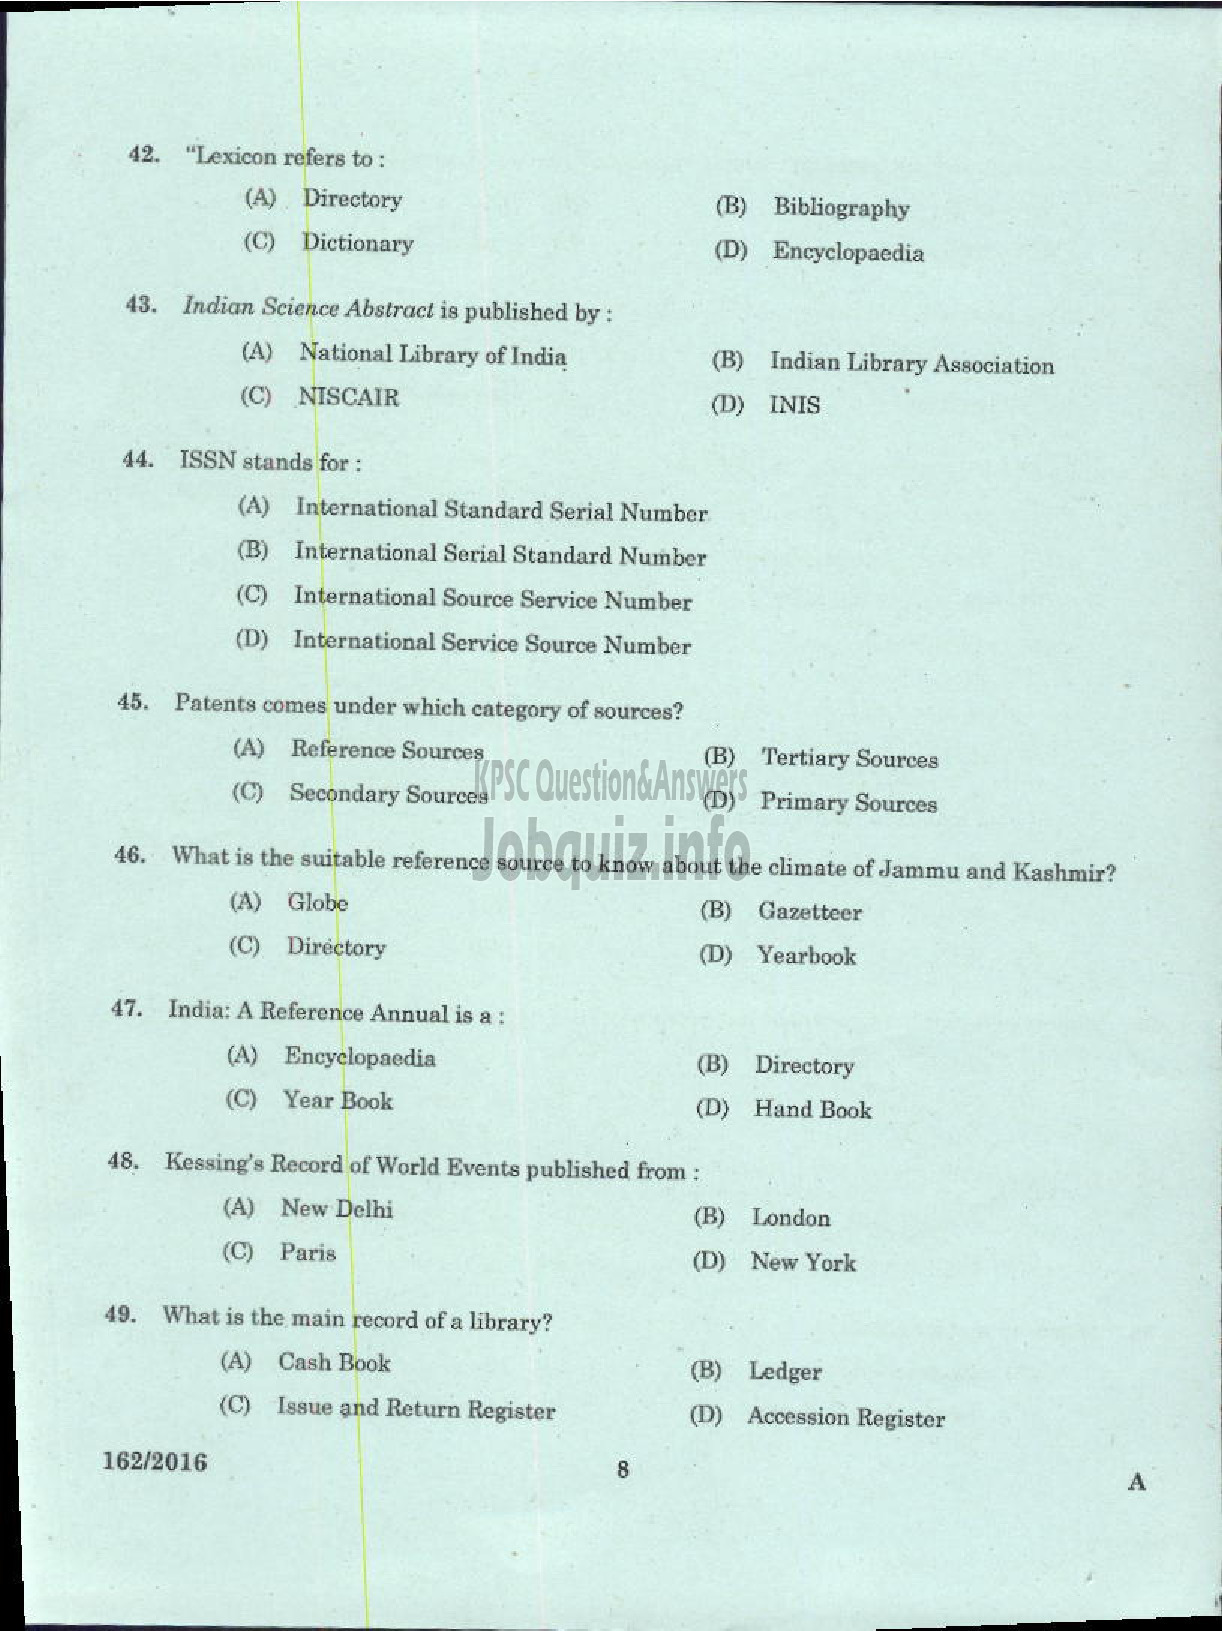 Kerala PSC Question Paper - LIBRARIAN GR IV KERALA COMMON POOL LIBRARY-6